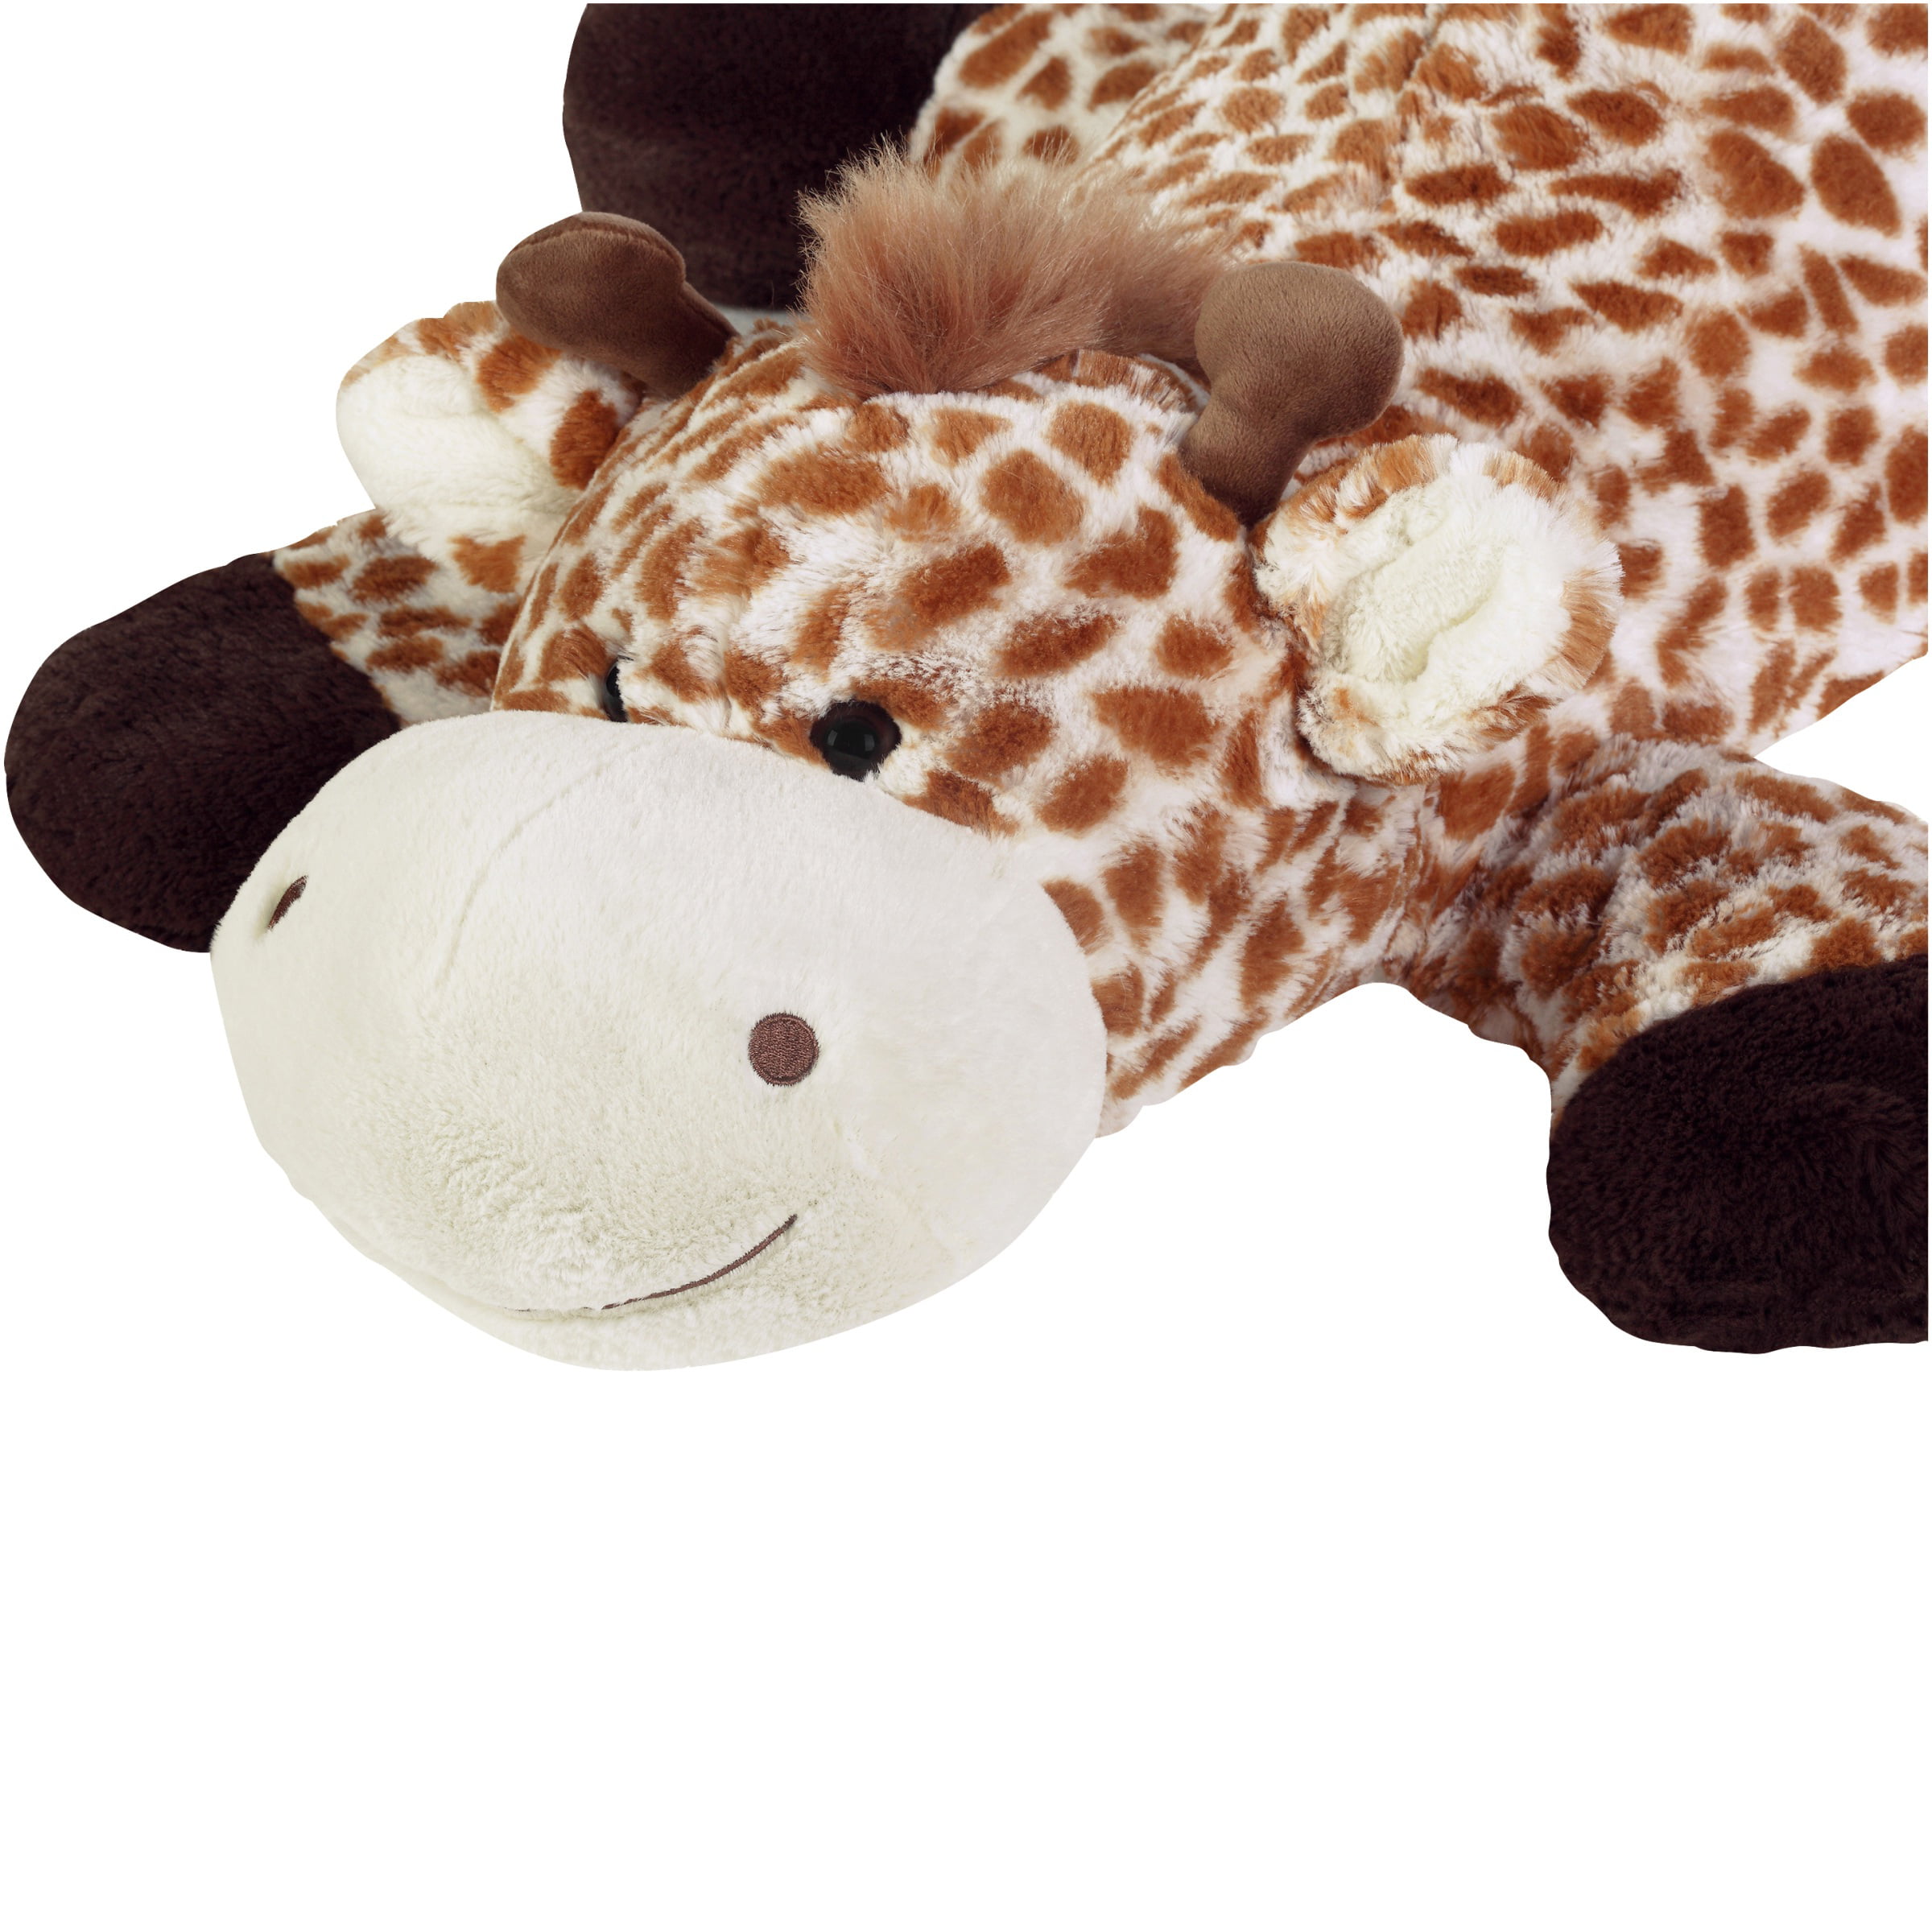 Details about   Holiday Time 8” Beige And  Orange Giraffe Stuffed Plush Animal Toy